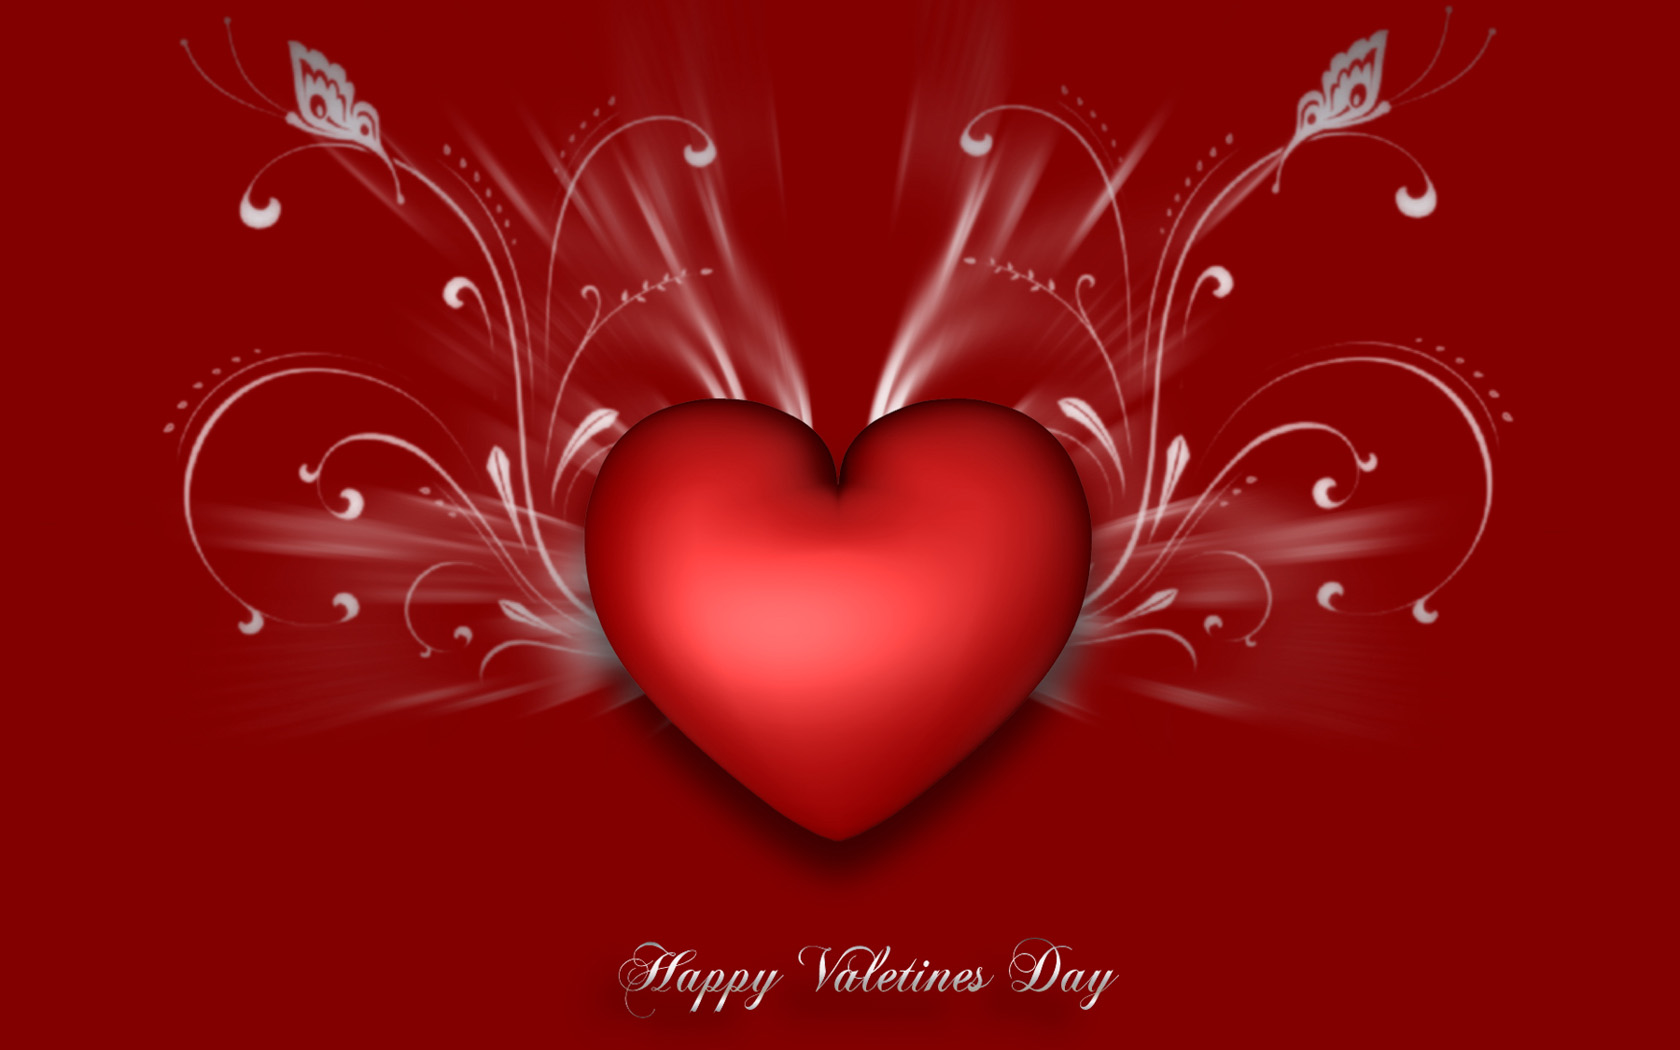 Happy Valentines Day Love HD Wallpaper Image Free Download